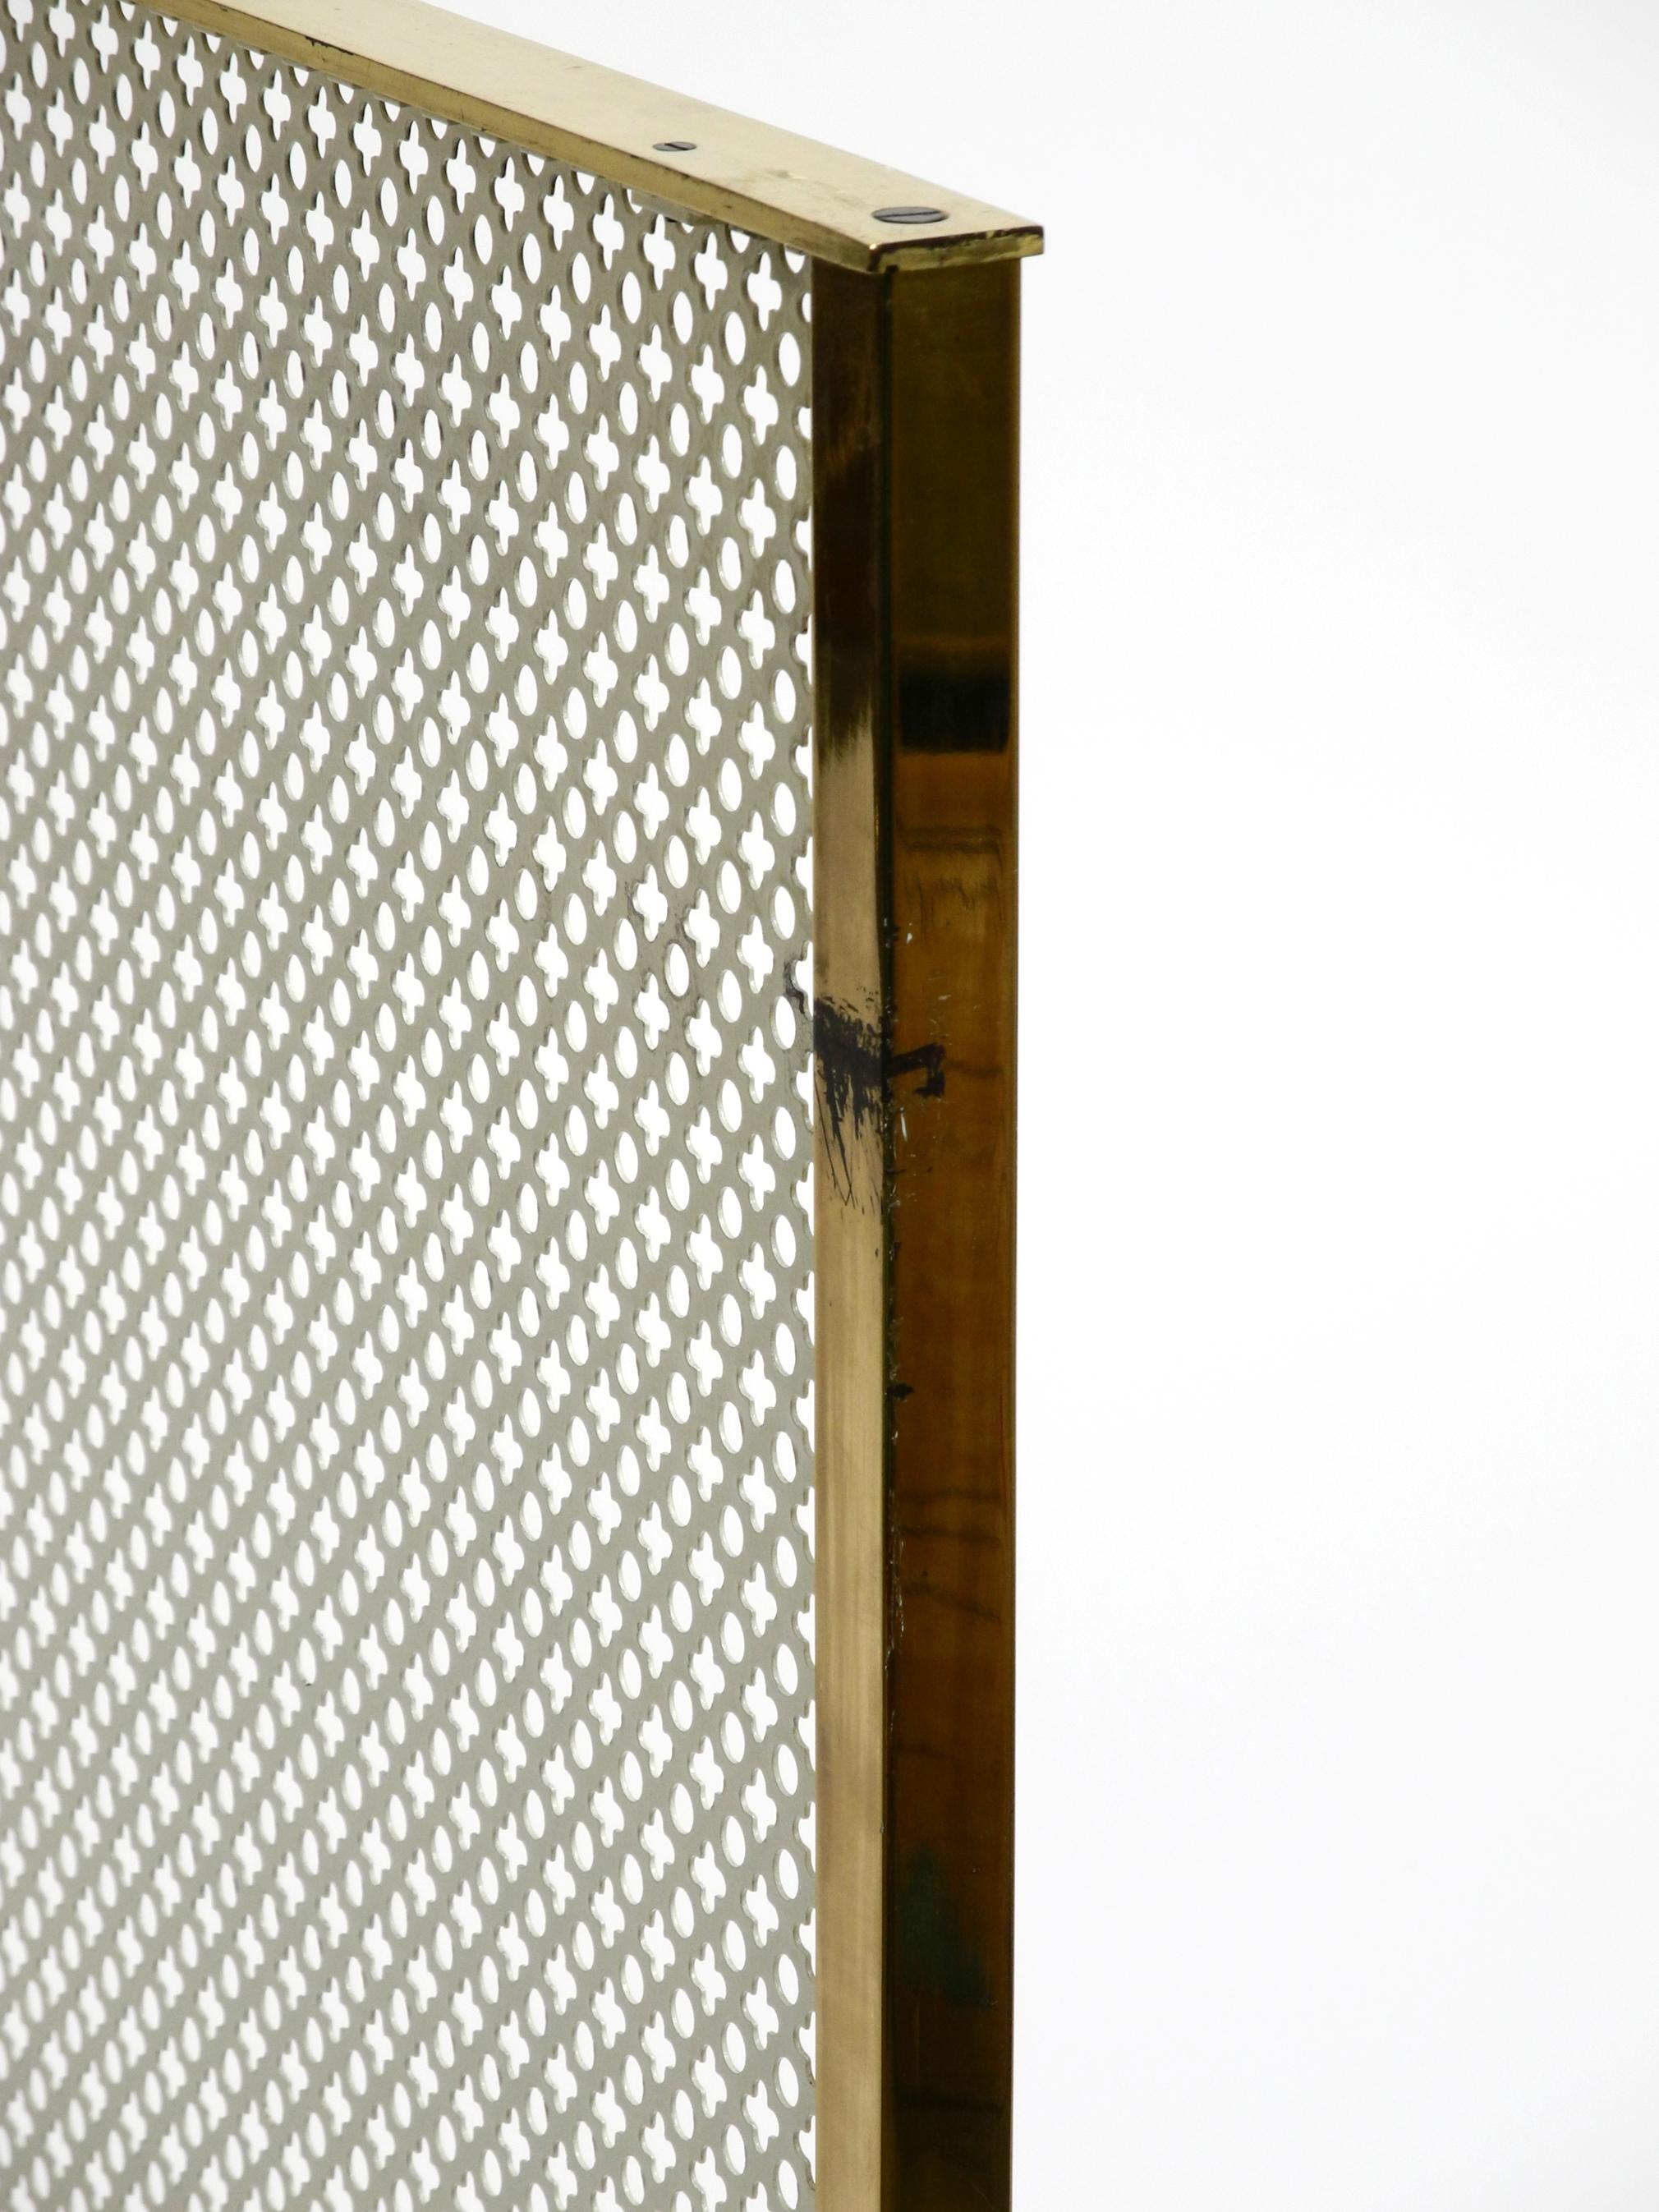 Mid-20th Century Beautiful Mid Century Radiator Covering Made of Brass and Perforated Sheet Metal For Sale